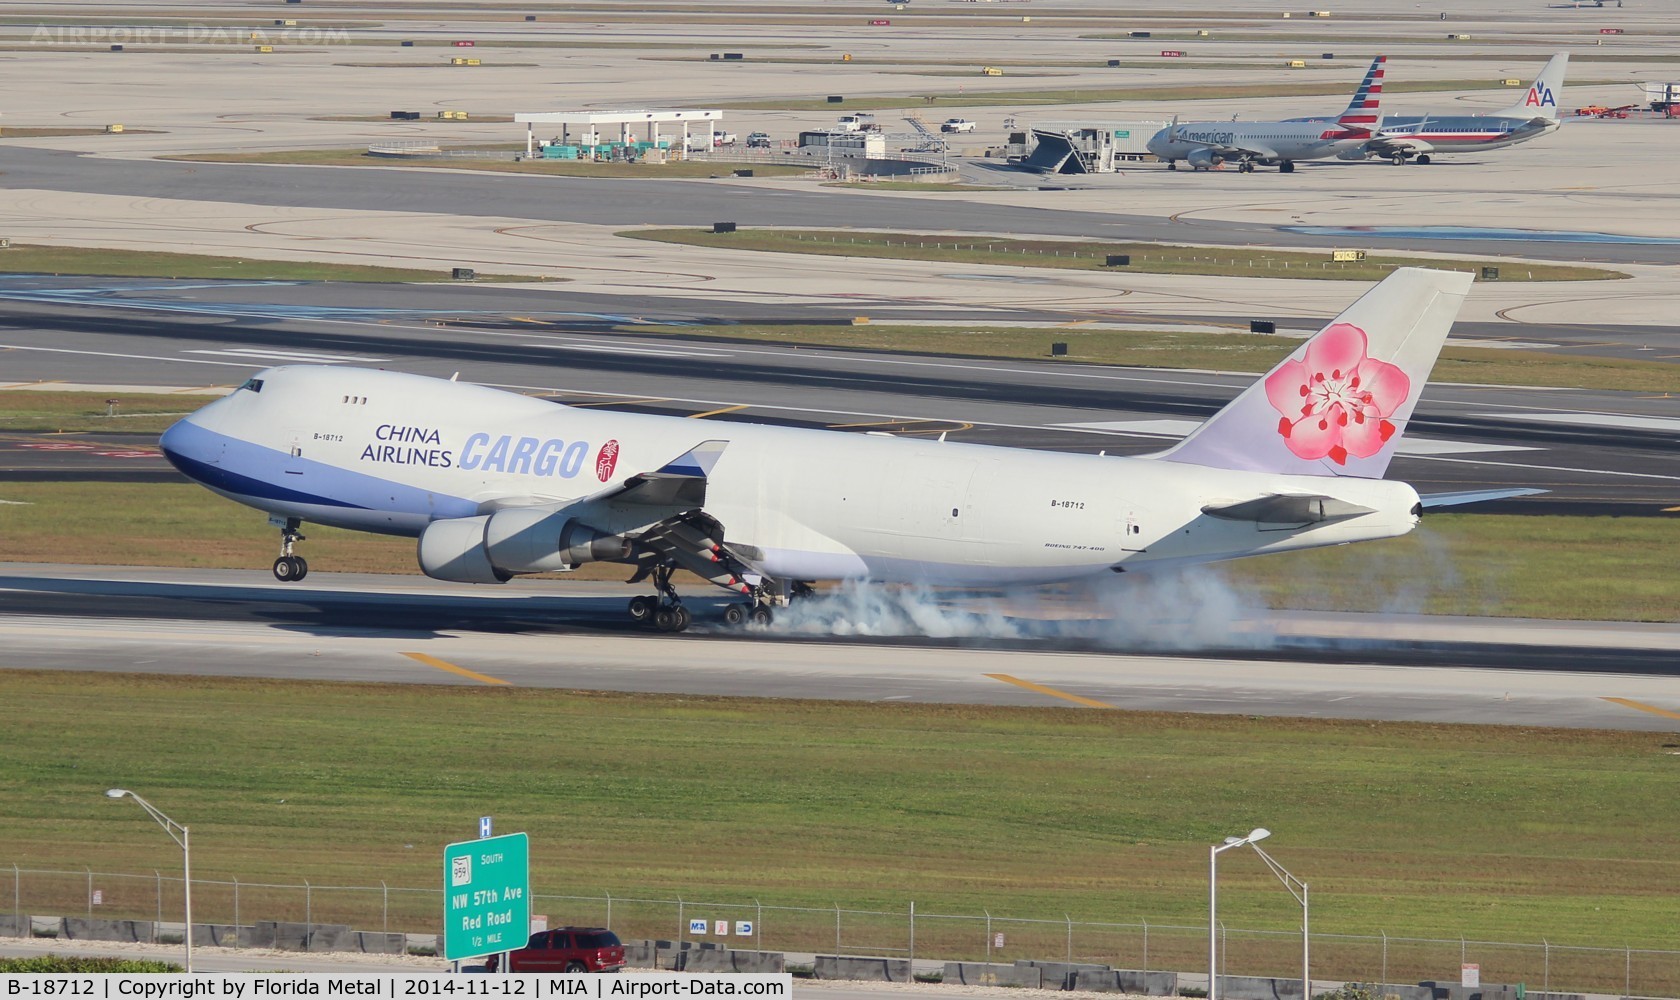 B-18712, 2003 Boeing 747-409F/SCD C/N 33729, China Airlines Cargo